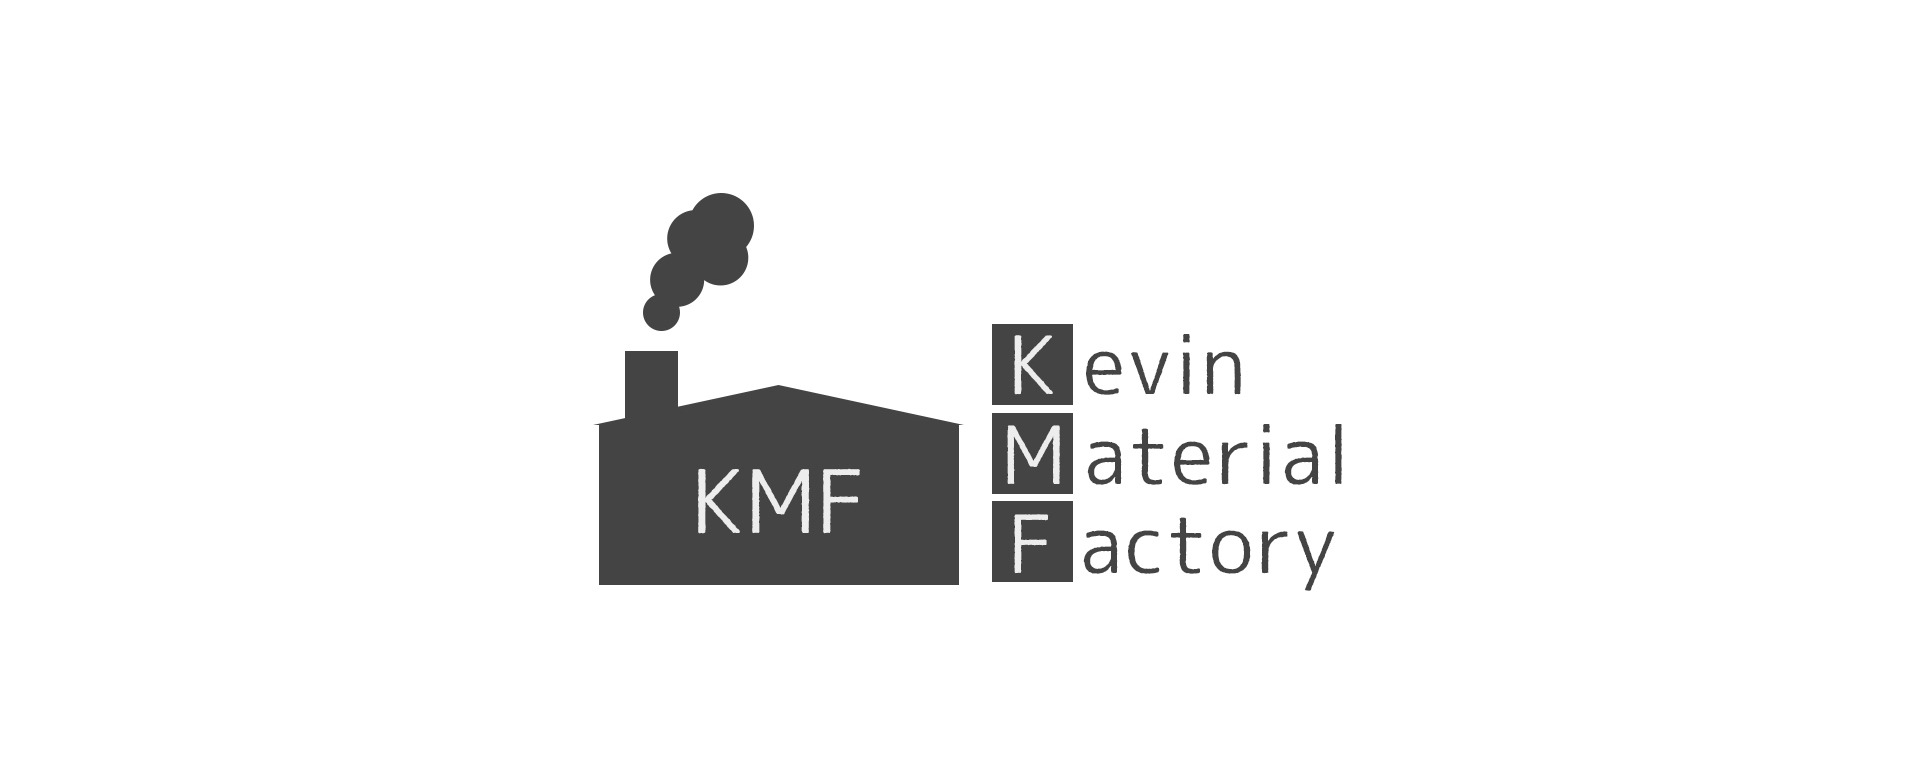 Kevin Material Factory